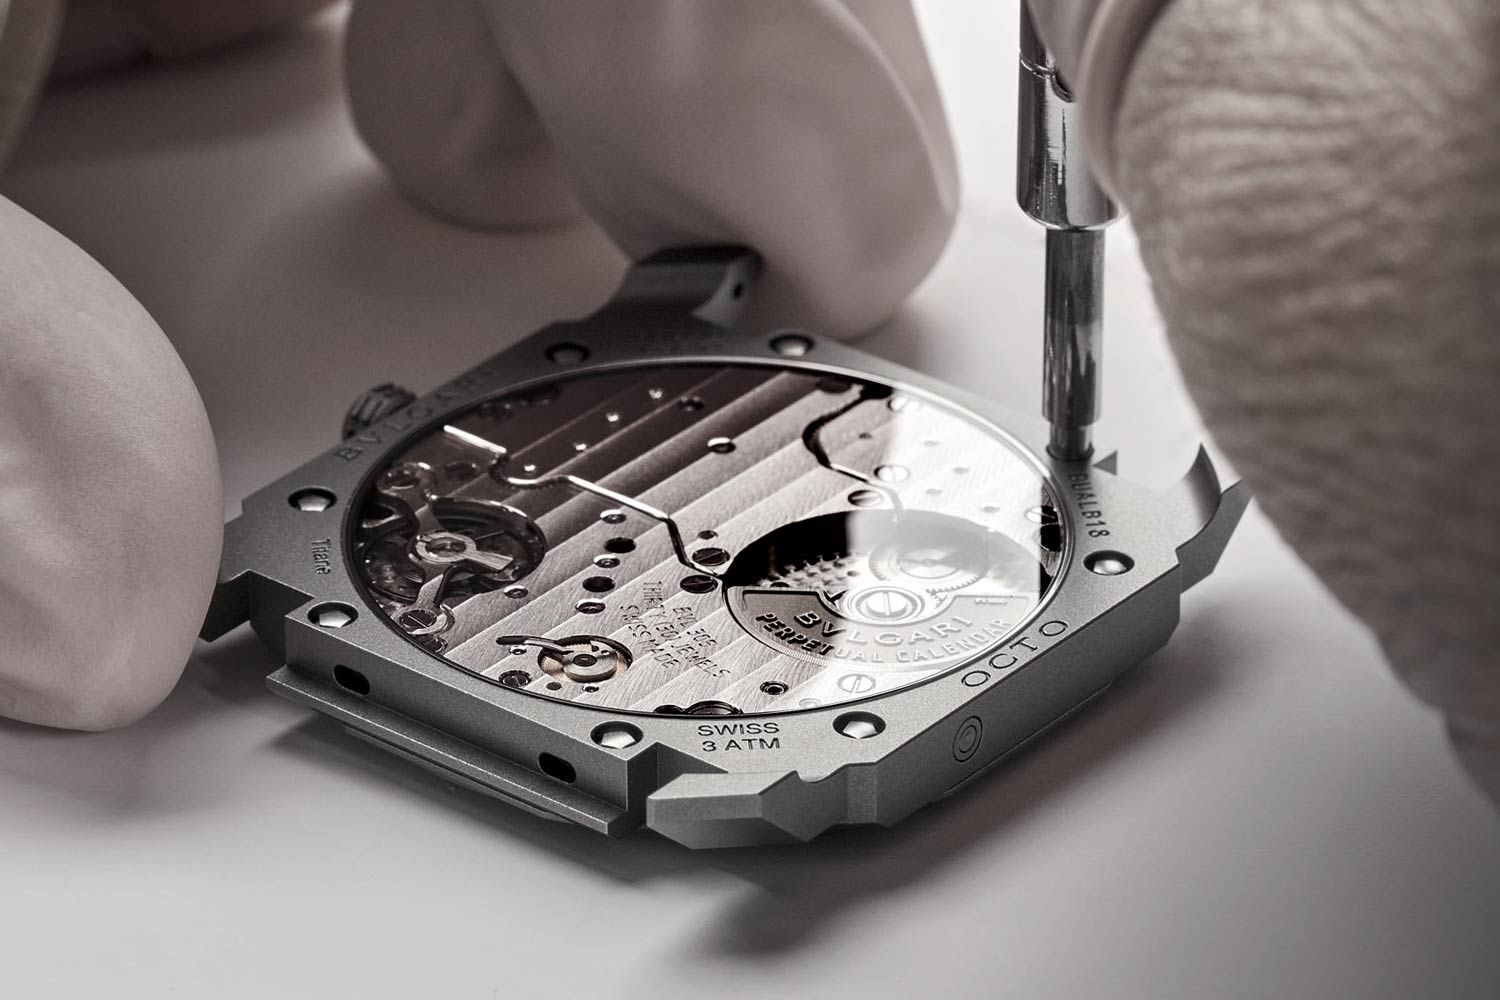 To make a watch that was just barely above 5mm in thickness, Bvlgari had to completely rethink each and every component, including finding an all-new way of casing their watch with the movement placed into a monocoque case from the front and holding the watch with screws that run from the bezel traversing to the caseback